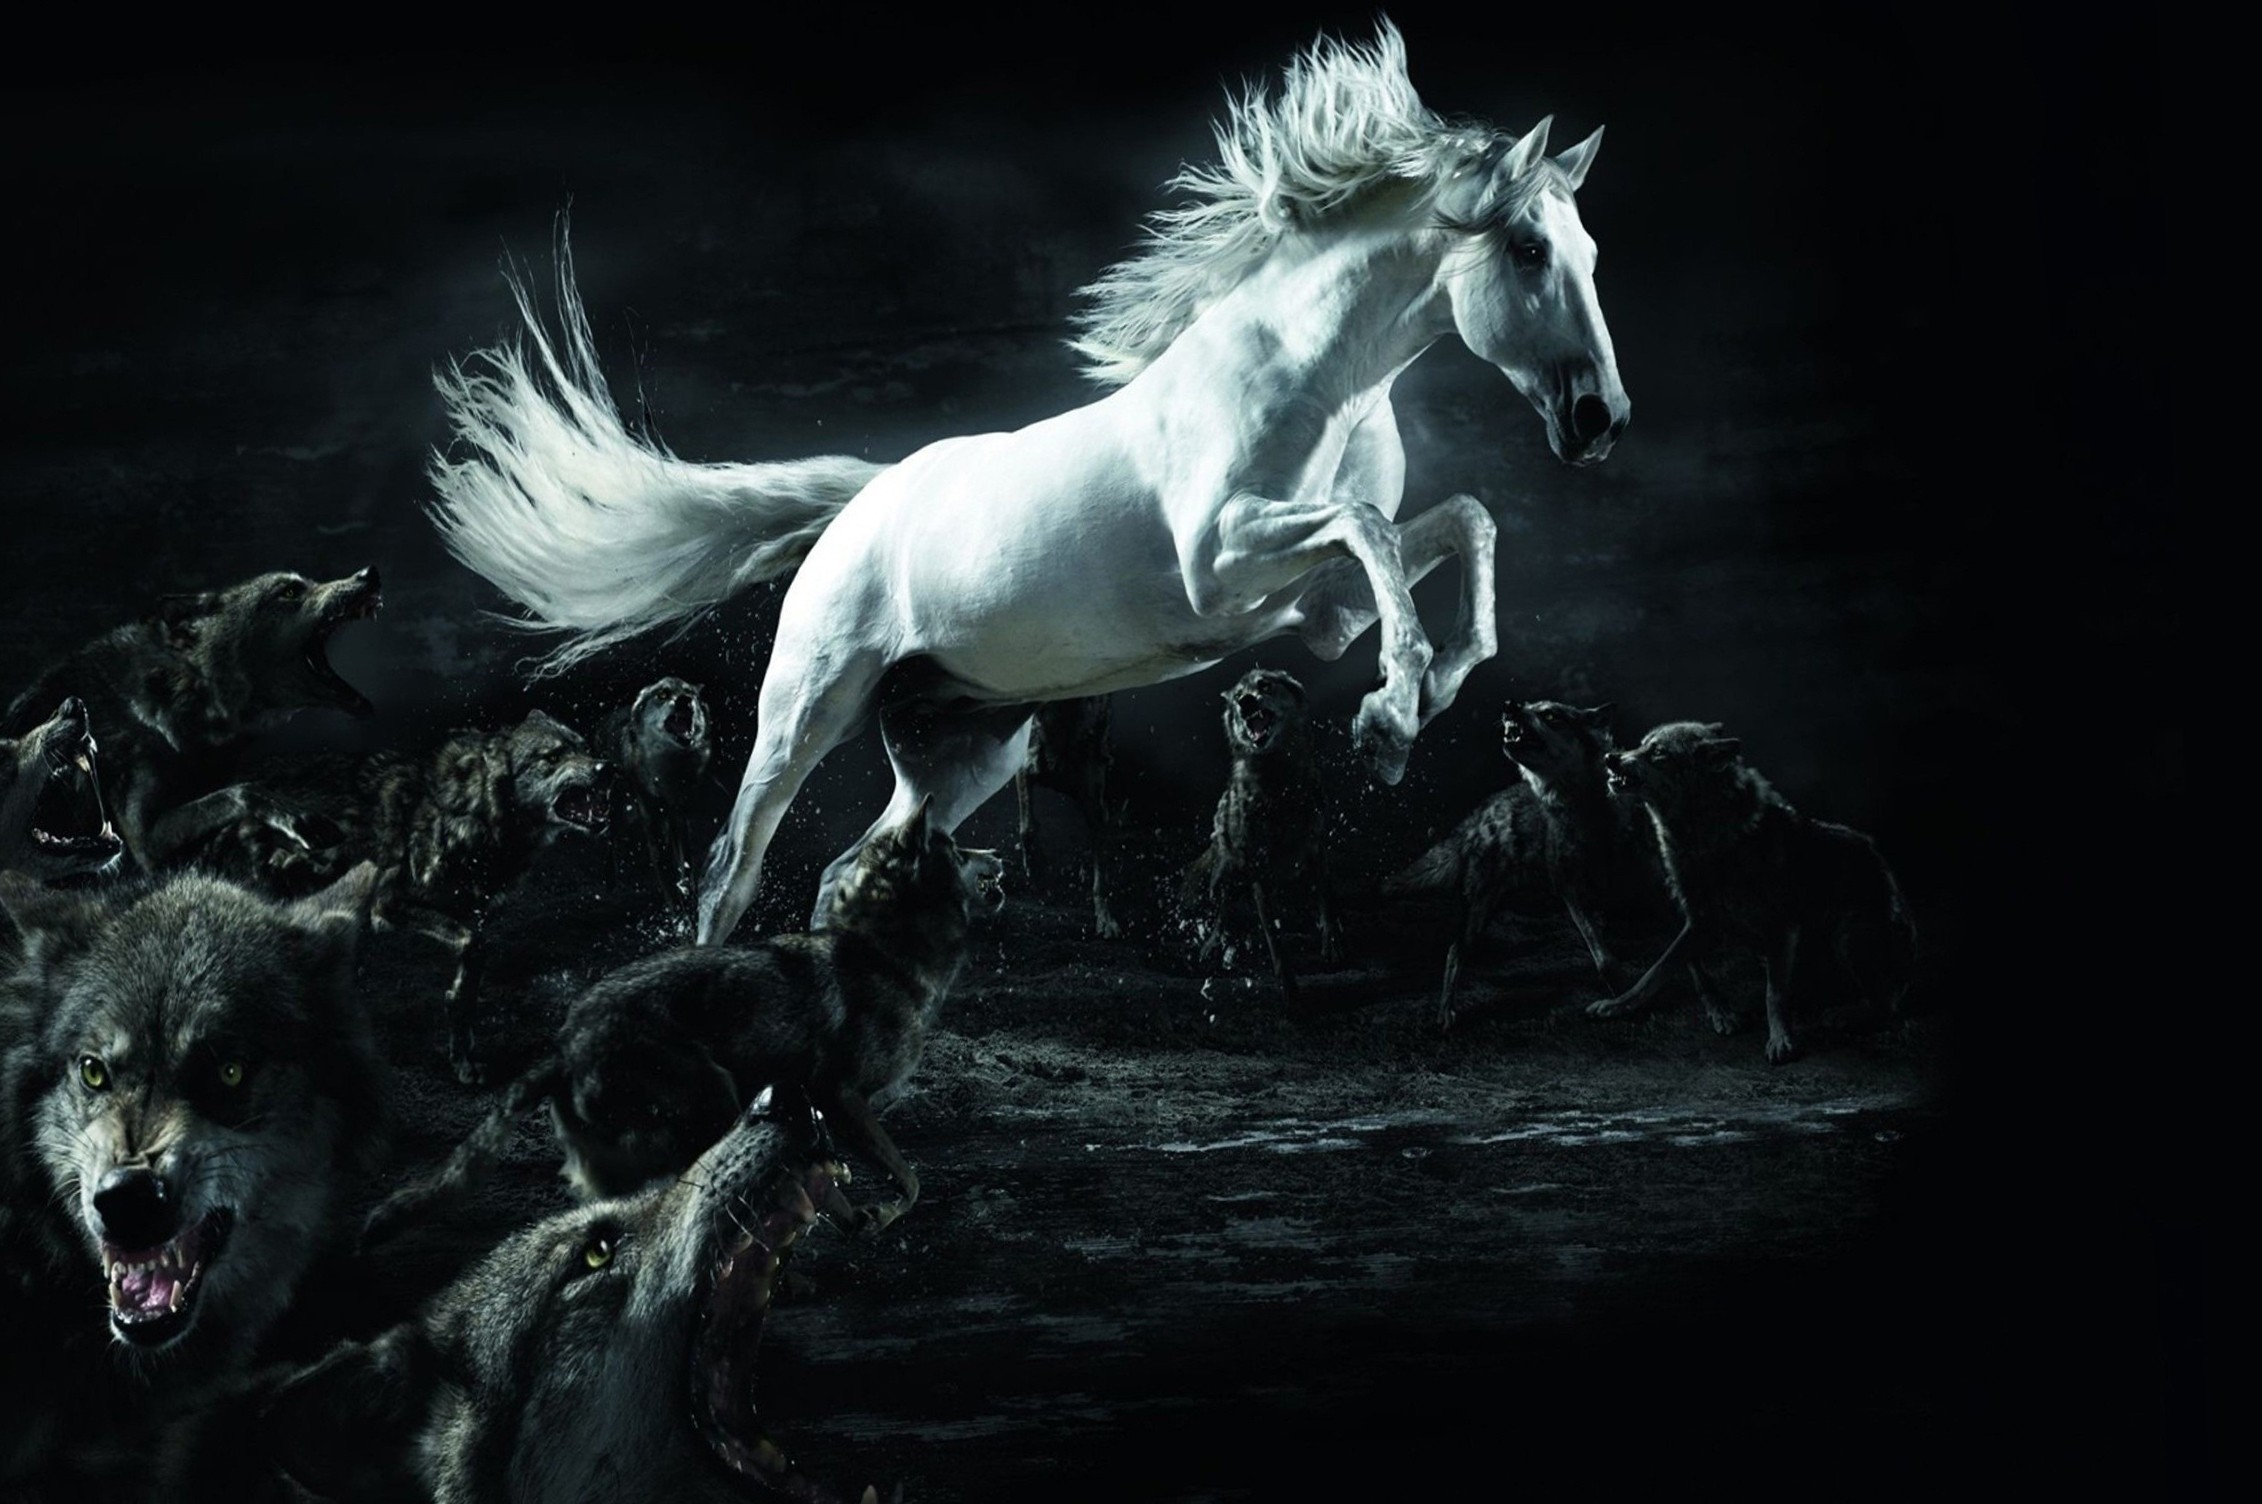 smart wallpaper hd,horse,darkness,black and white,stallion,fictional character